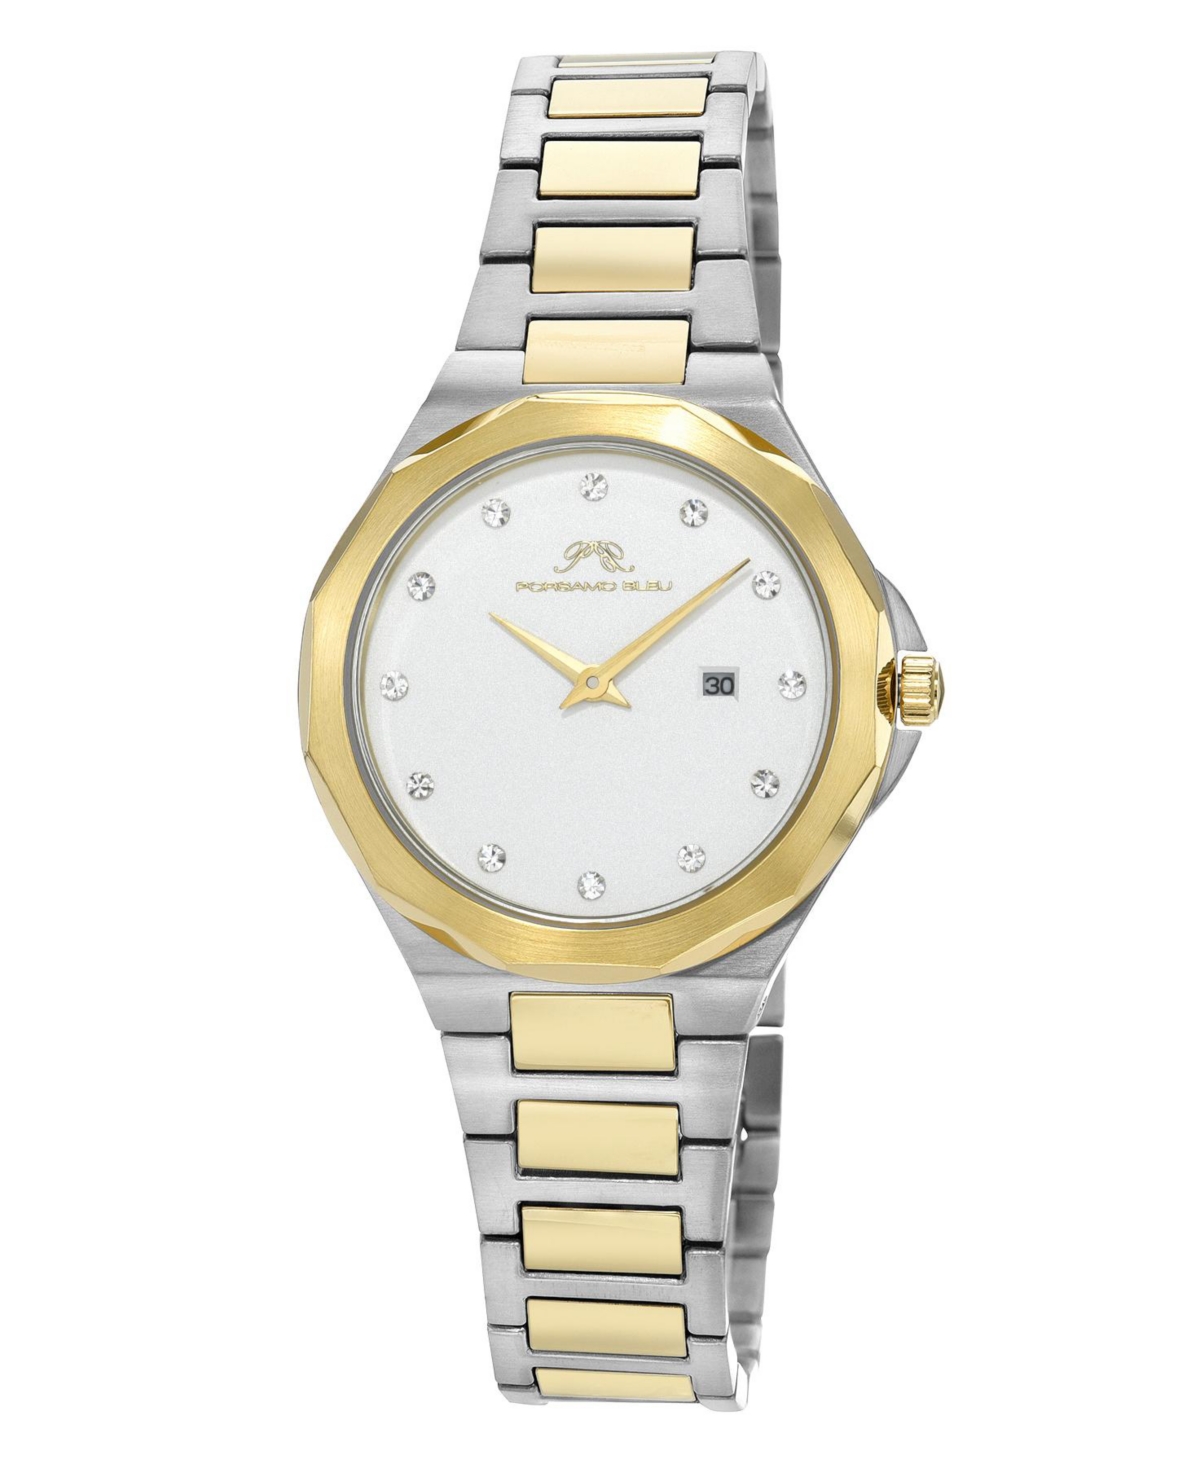 Victoria Stainless Steel Two Tone & White Women's Watch 1242CVIS - Two-tone